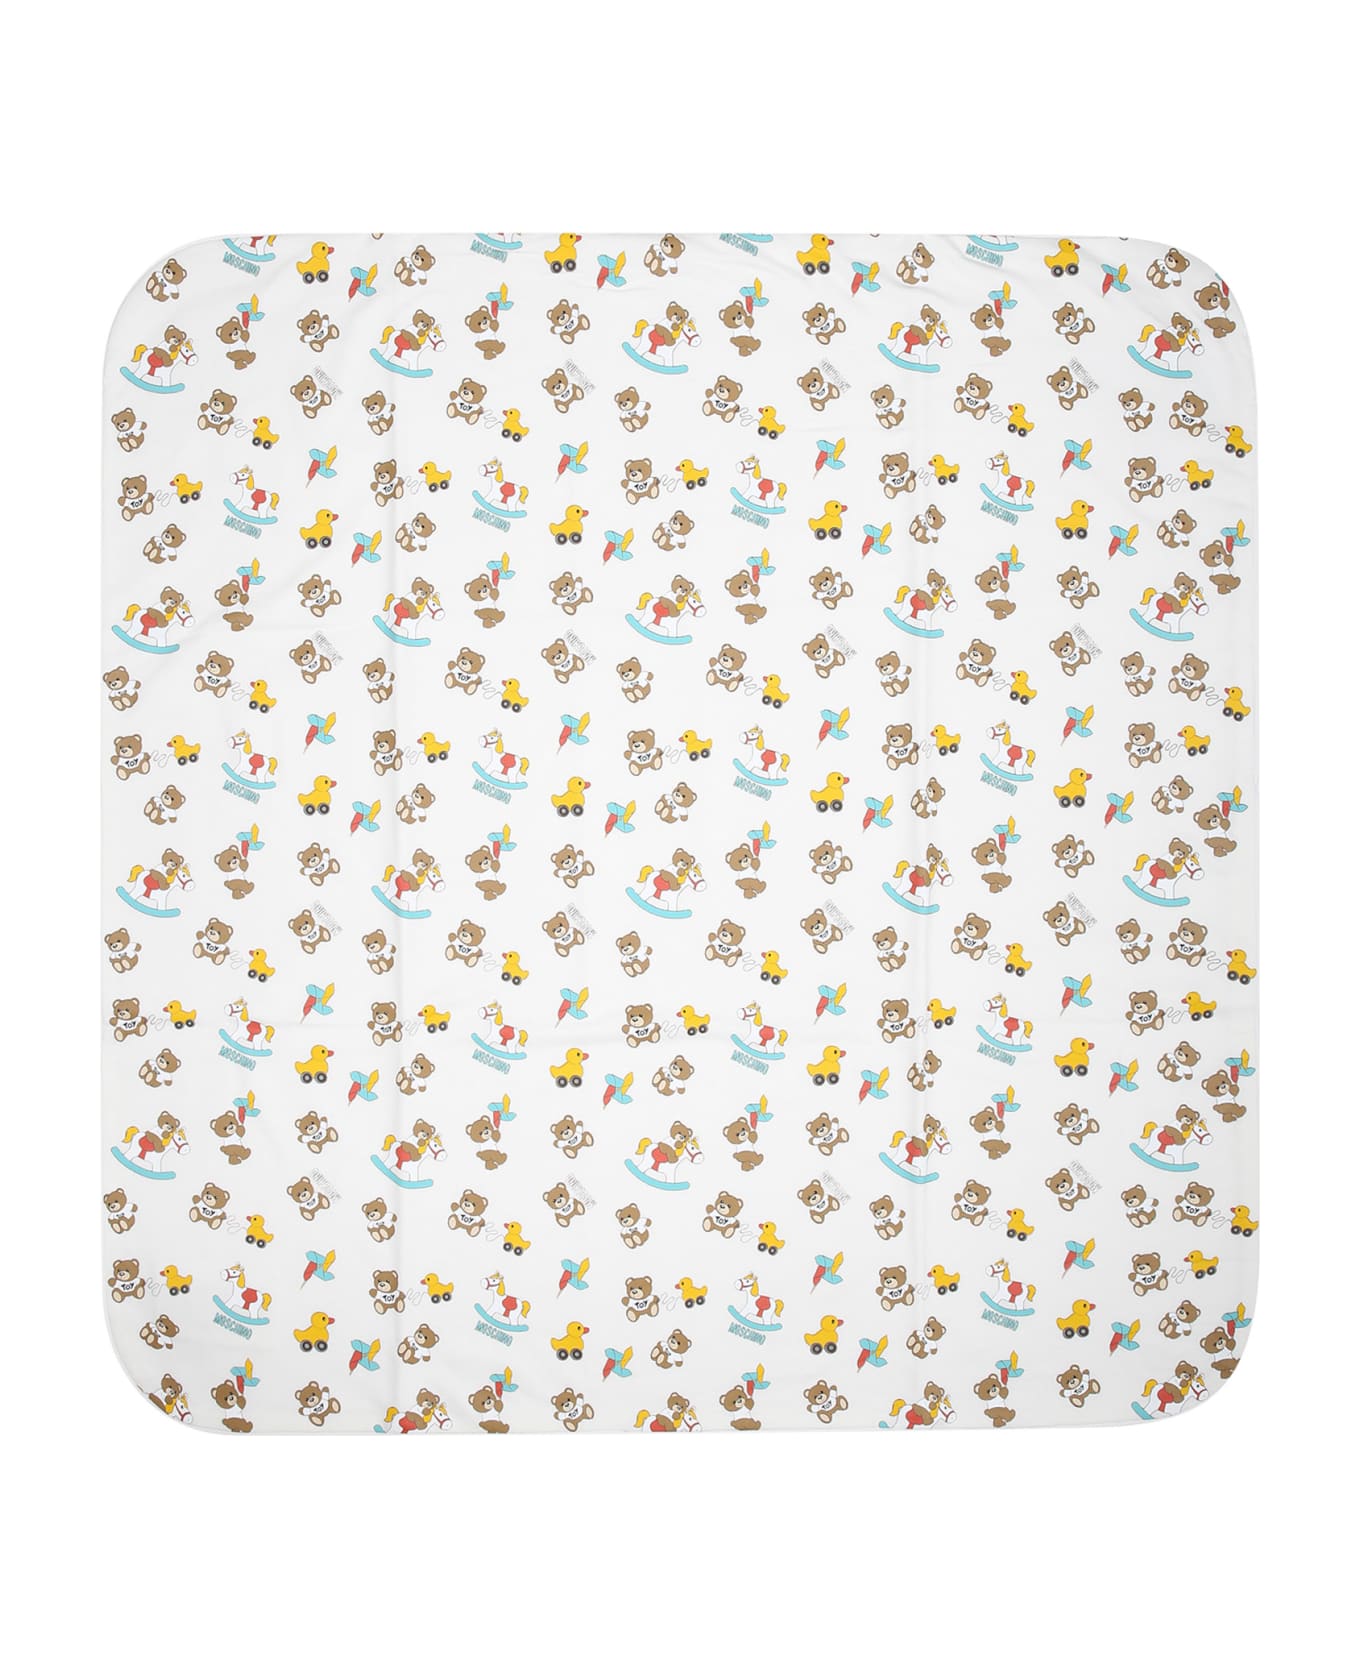 Moschino Ivory Babies Blanket With All-over Pattern - Ivory